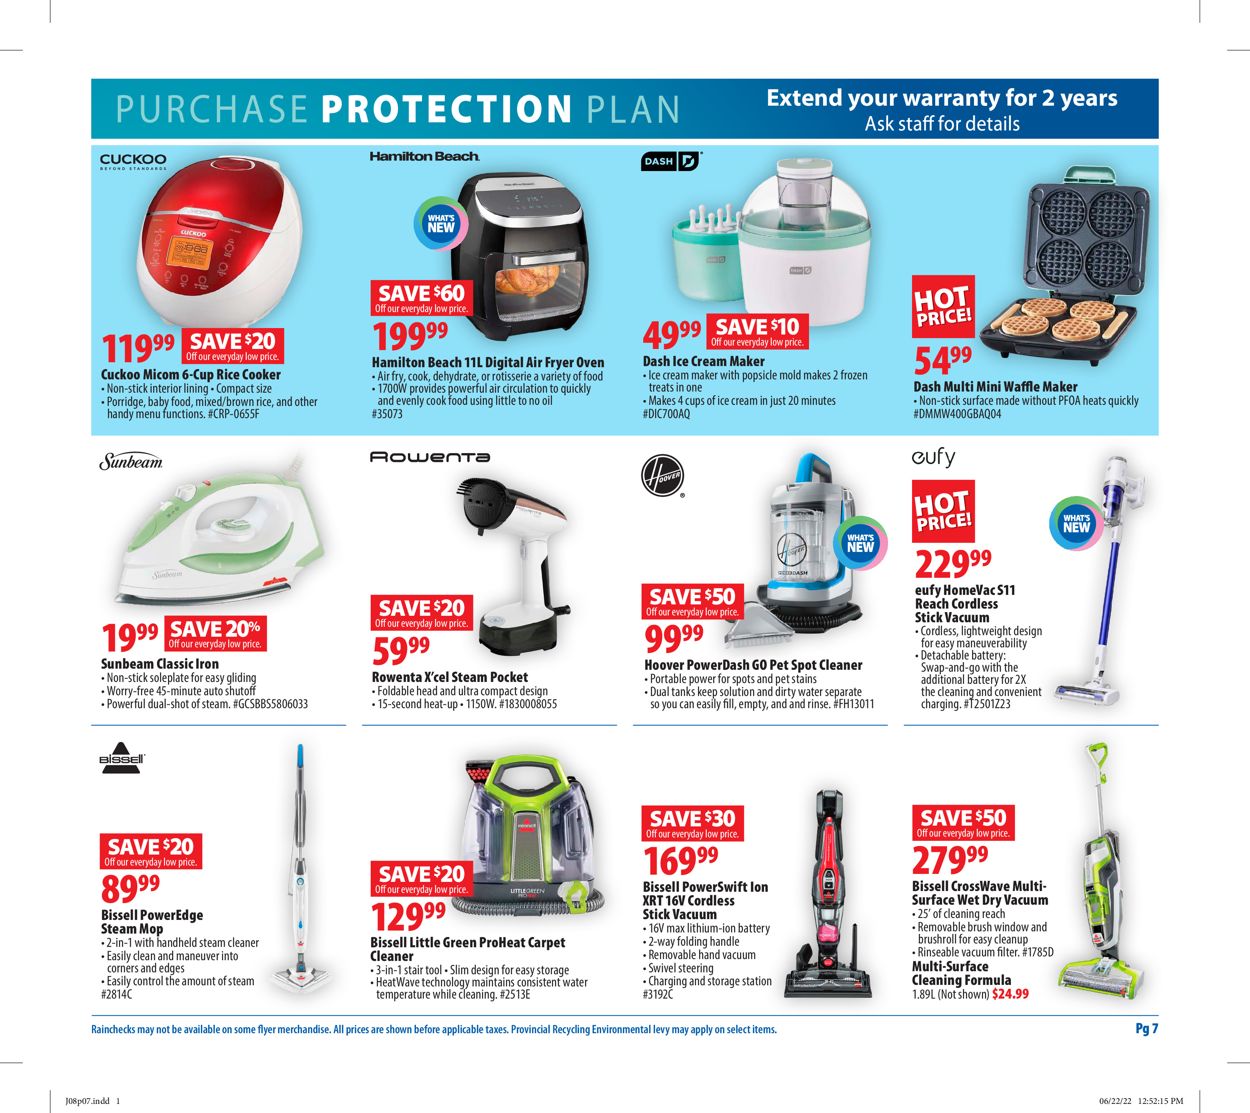 London Drugs Flyer from 07/08/2022